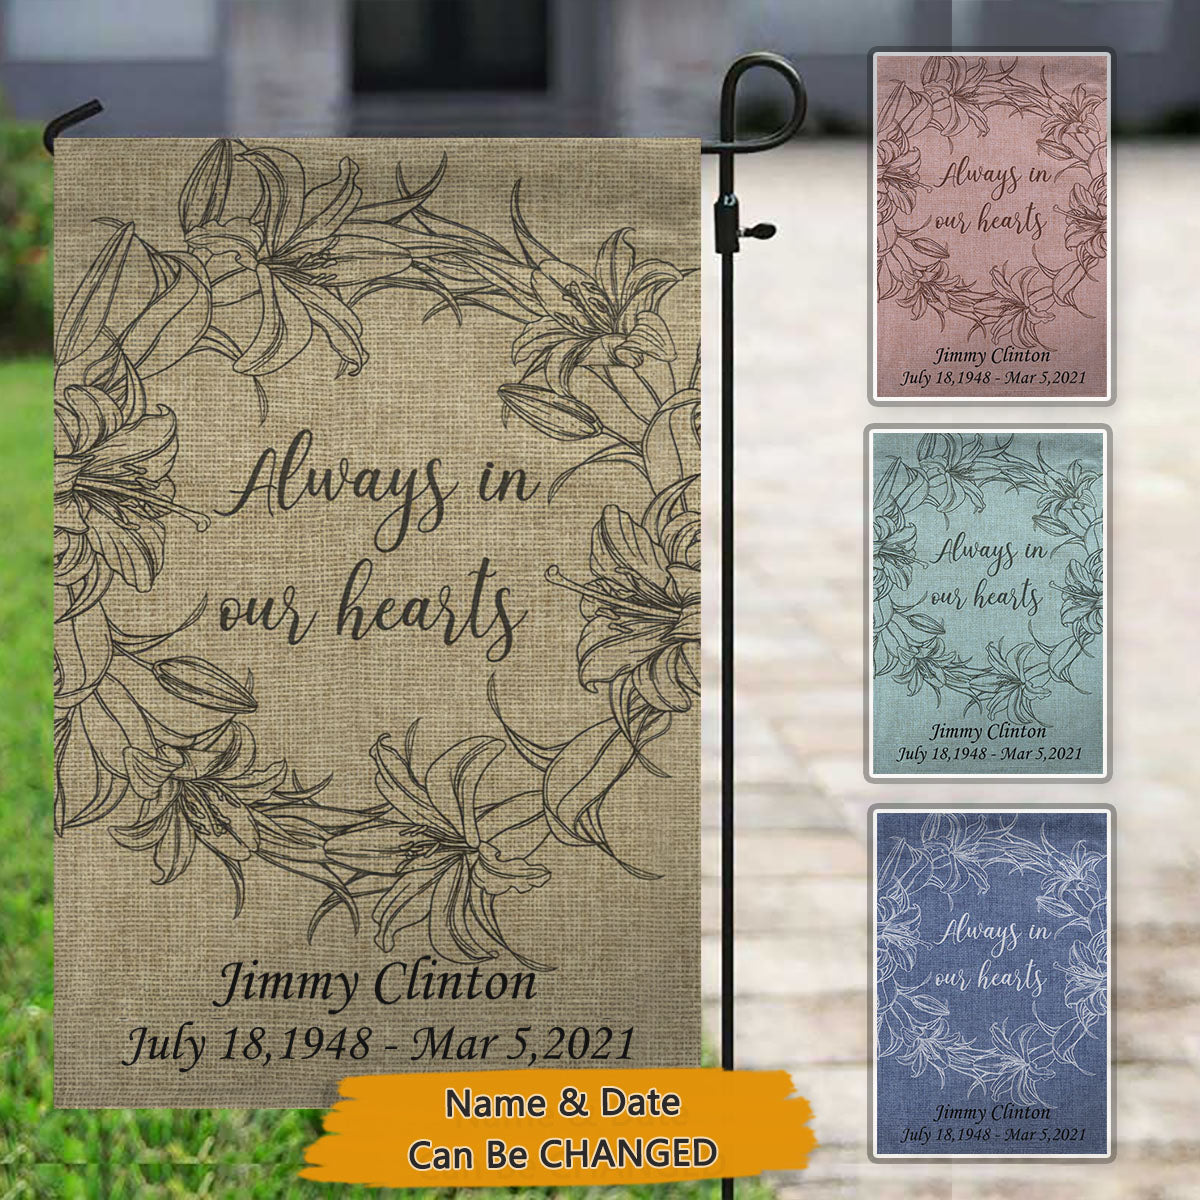 Personalized Always In Our Hearts Burlap Garden Flag